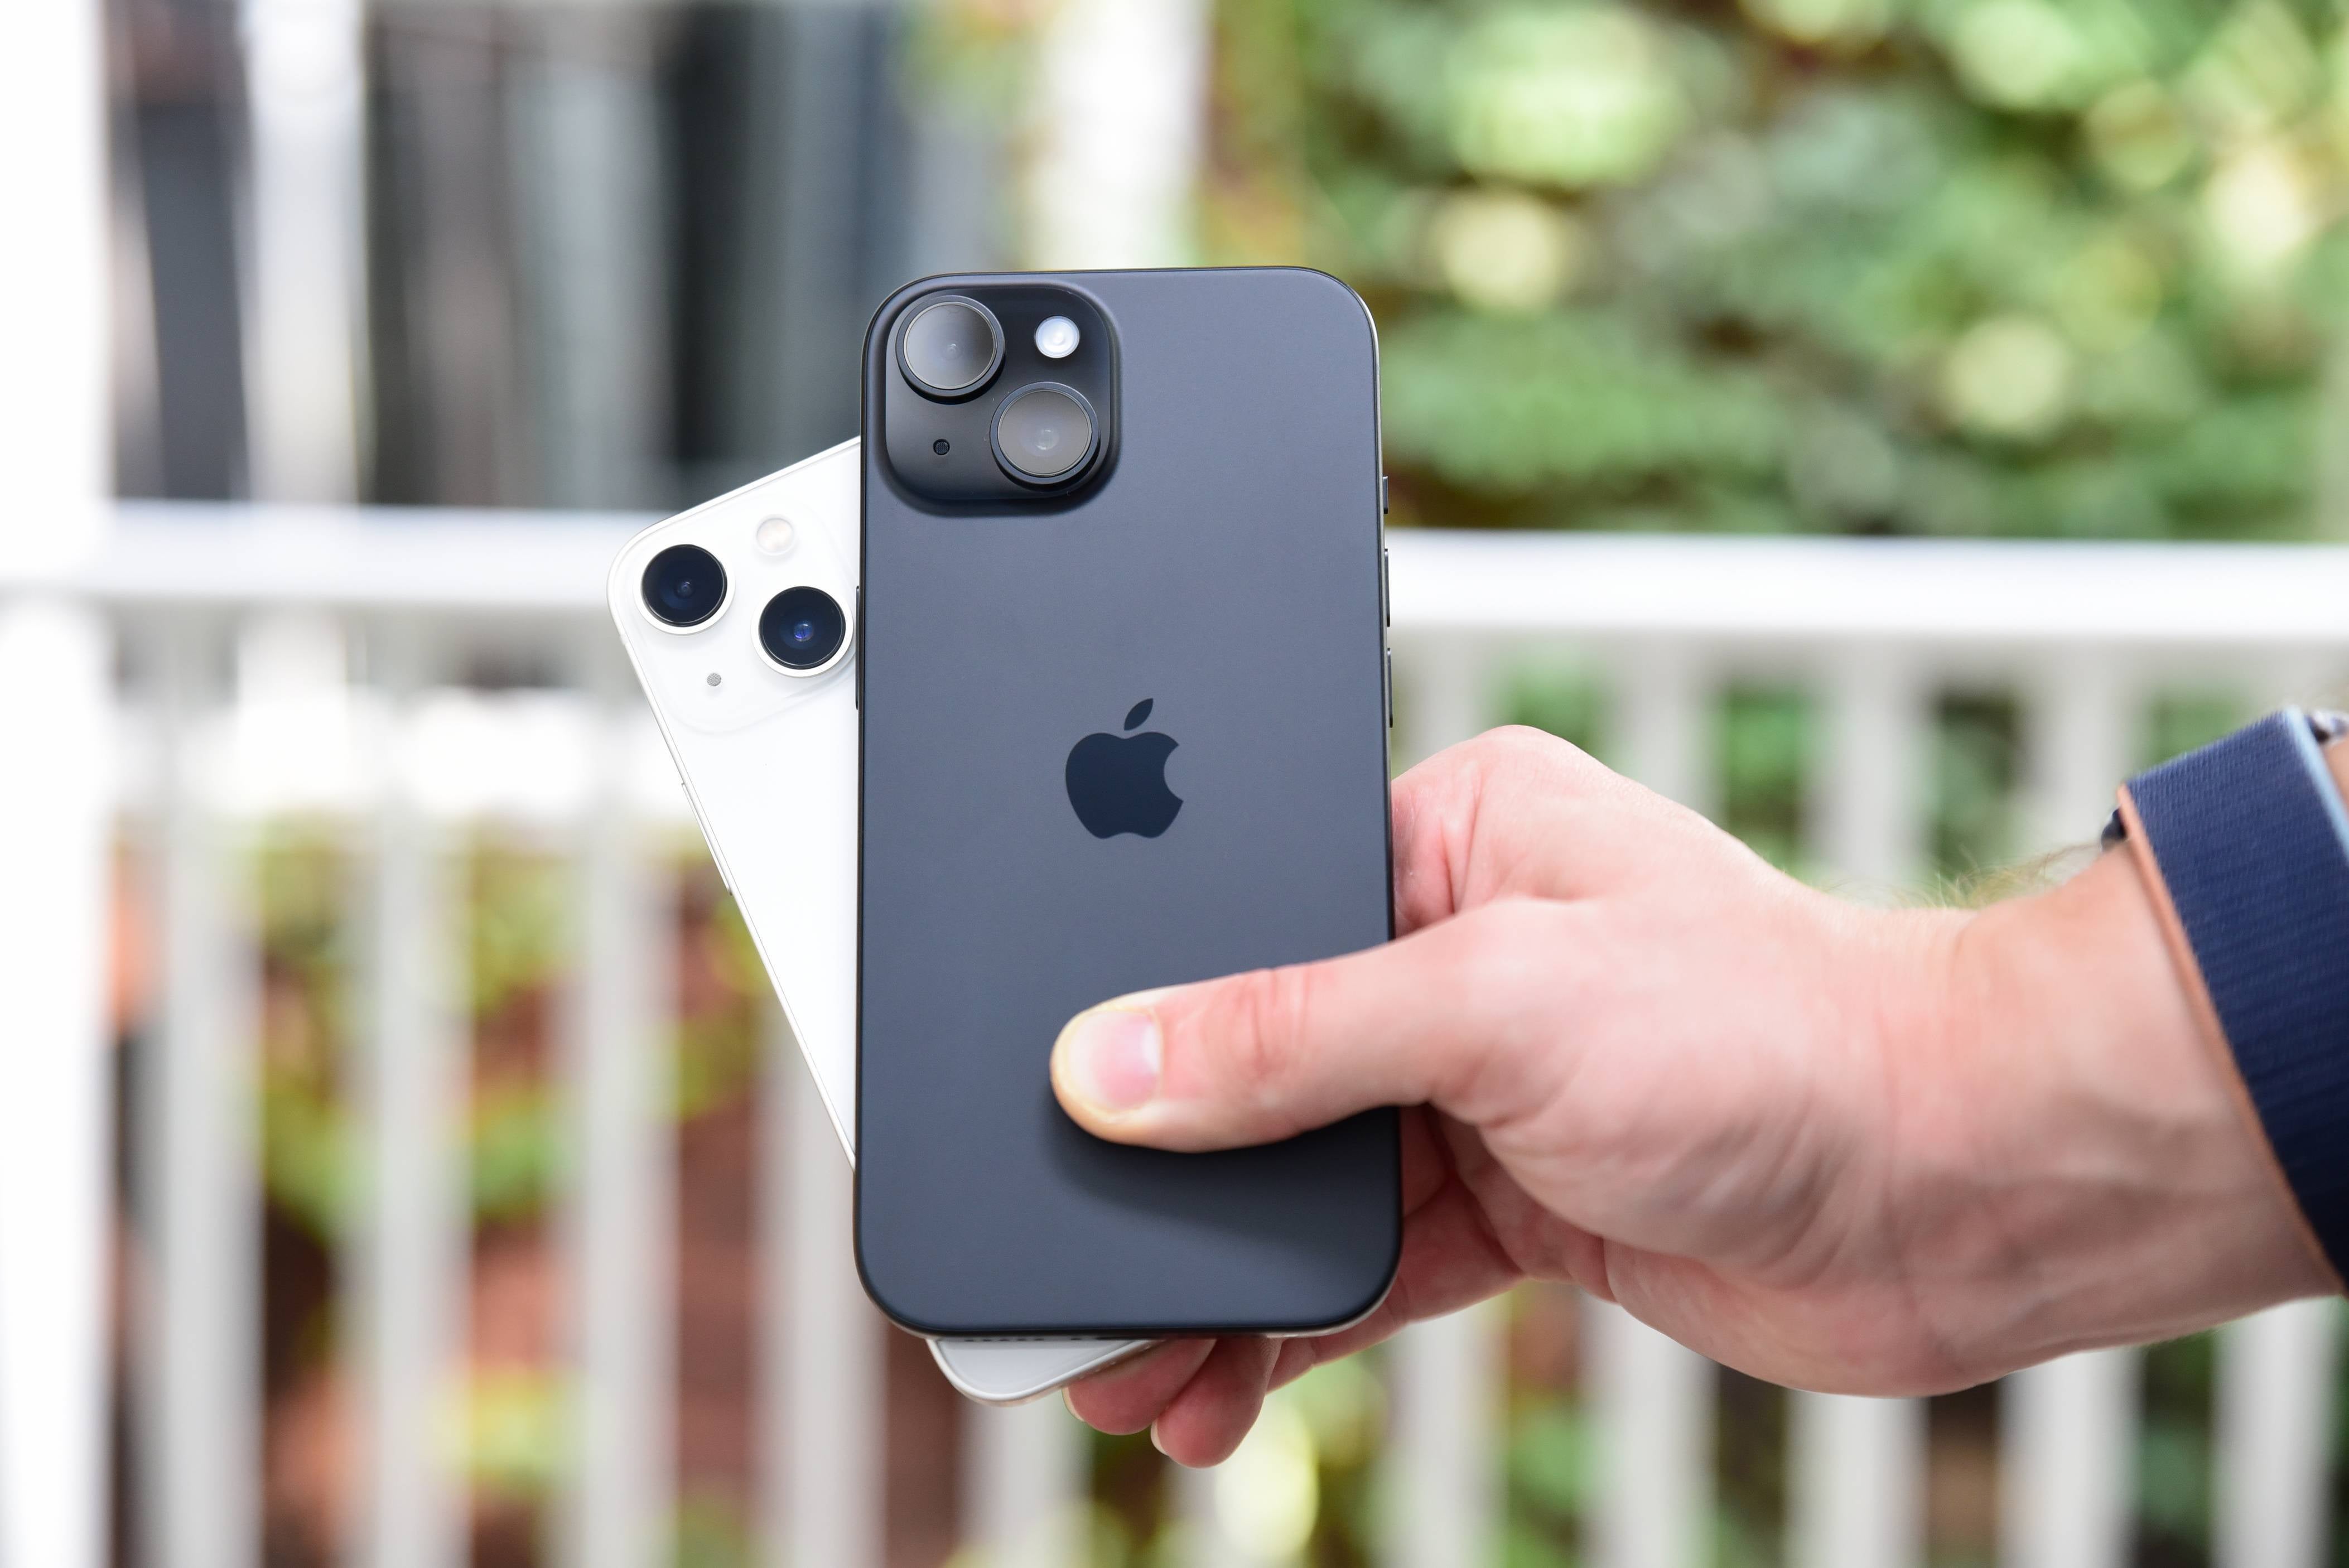 The iPhone 13 mini: A Review for Those Who Want a Smaller Phone